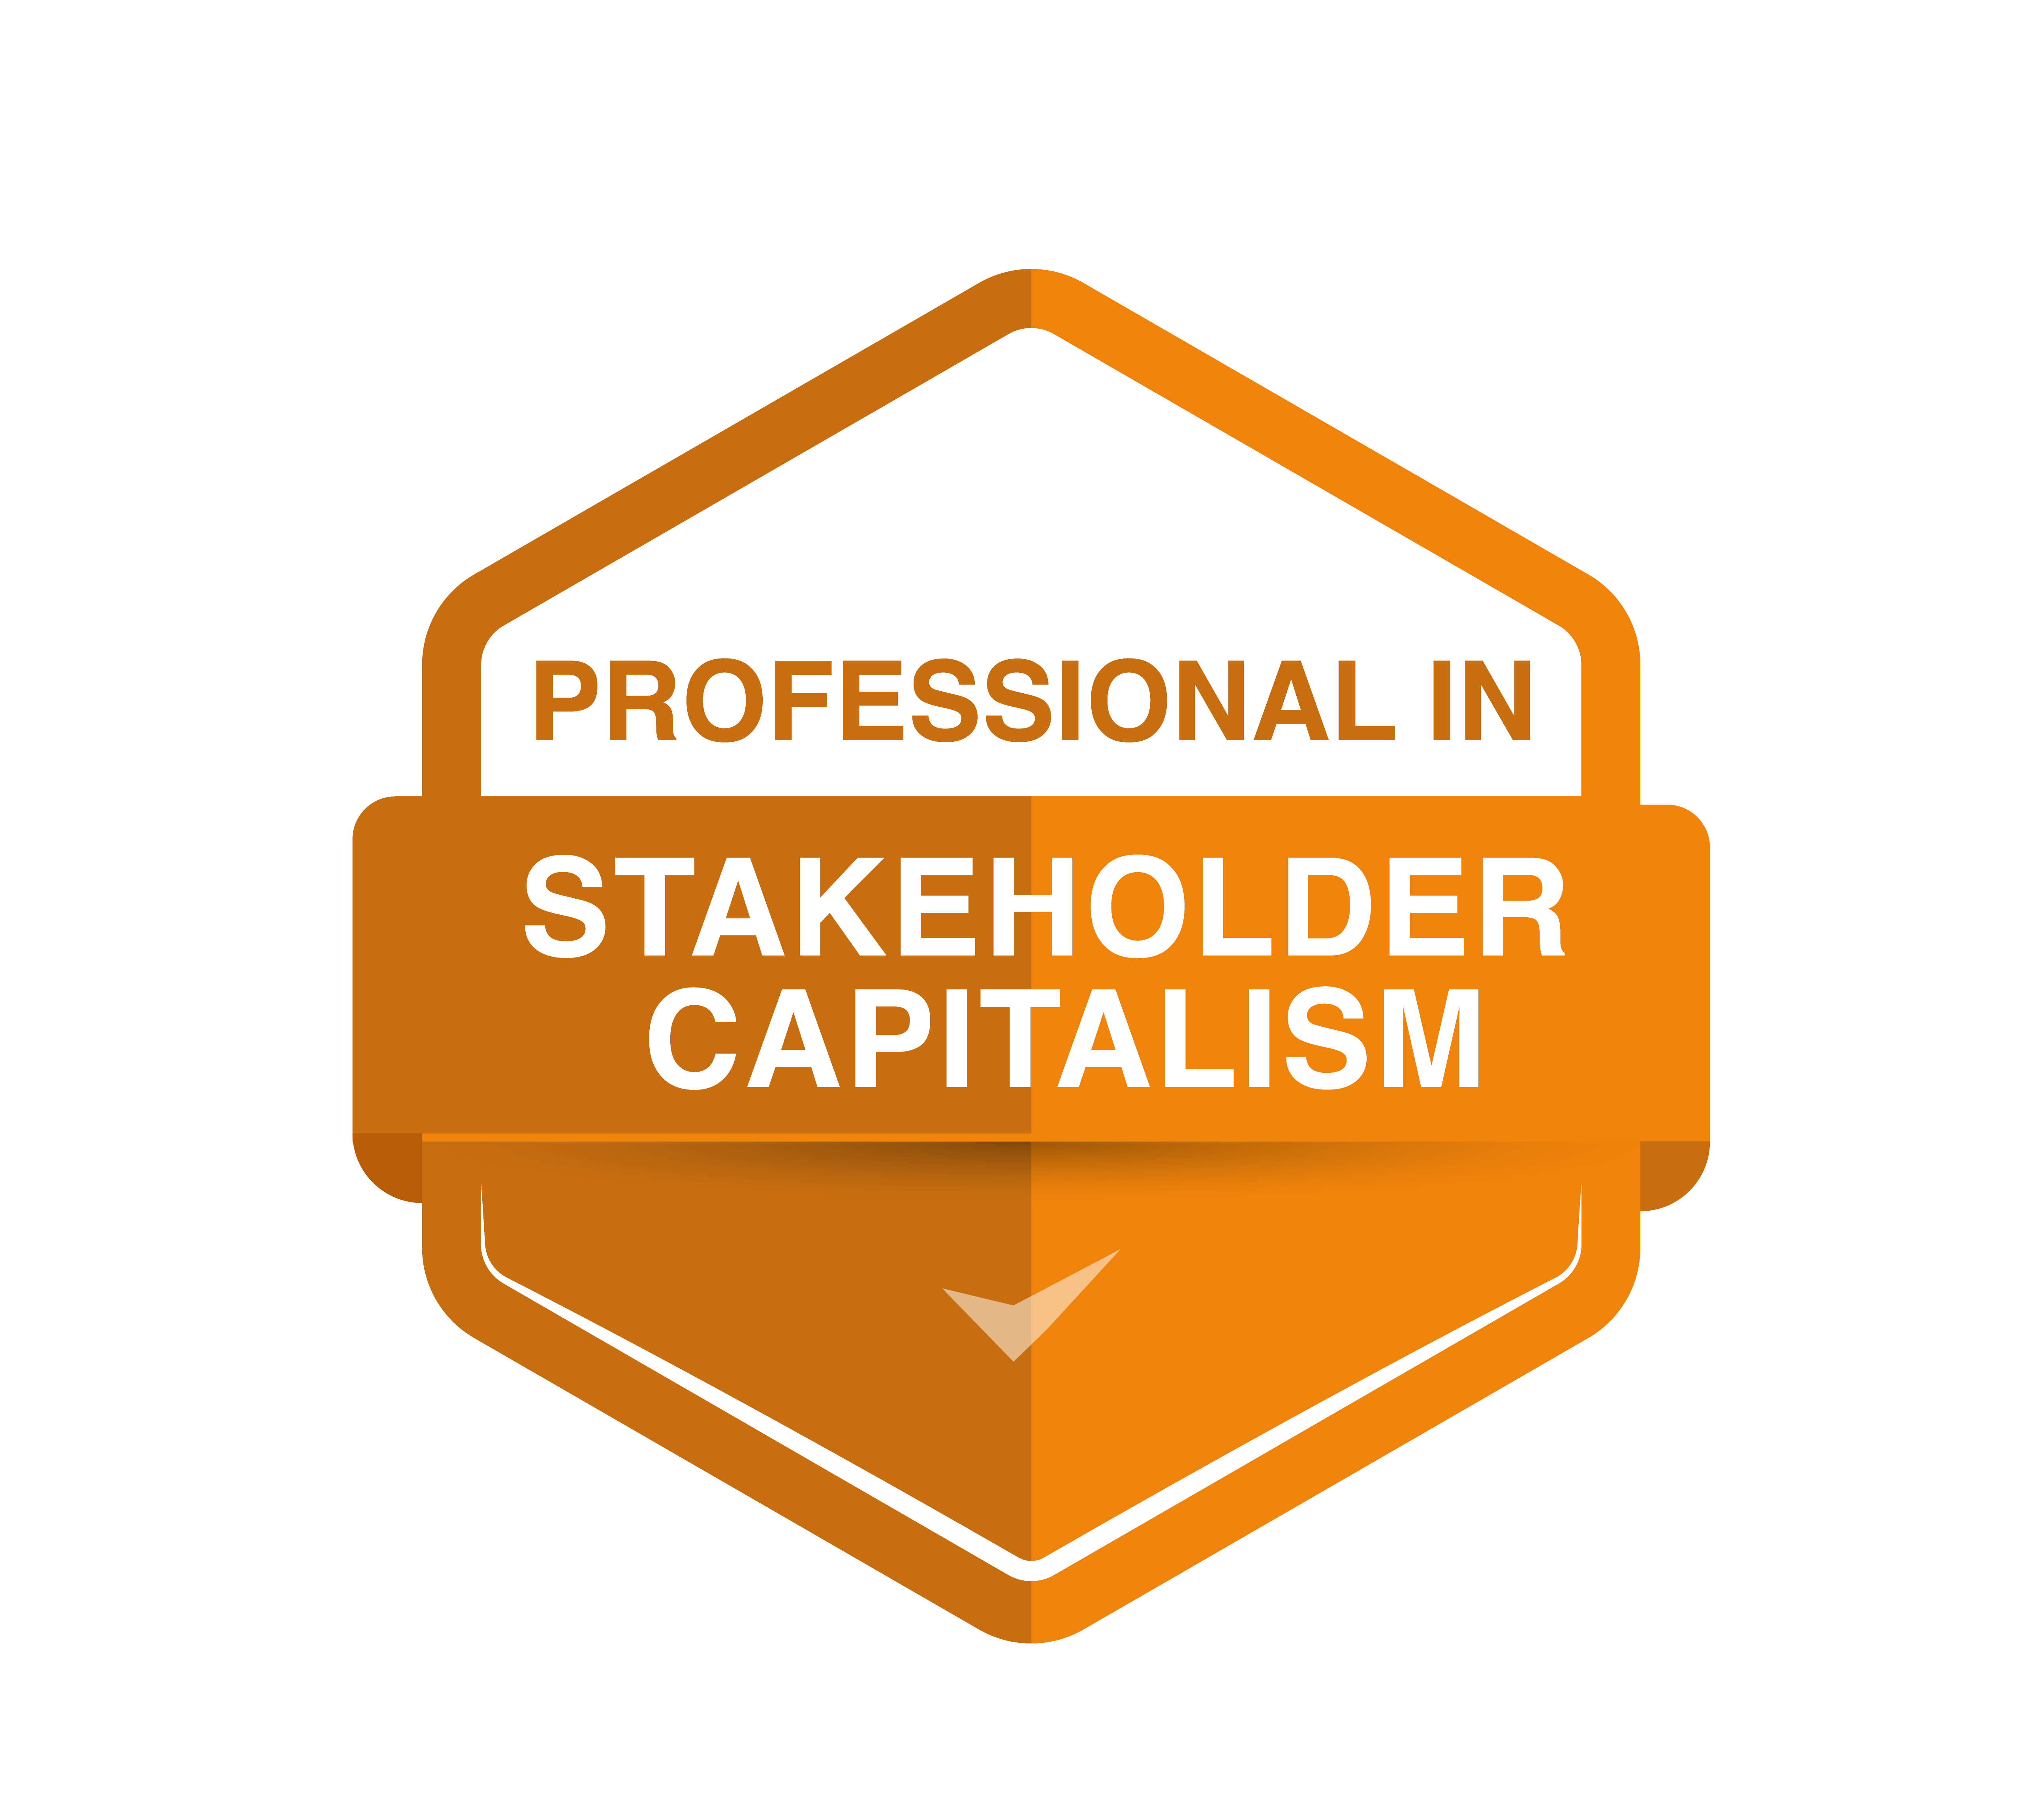 Professional in Stakeholder Capitalism